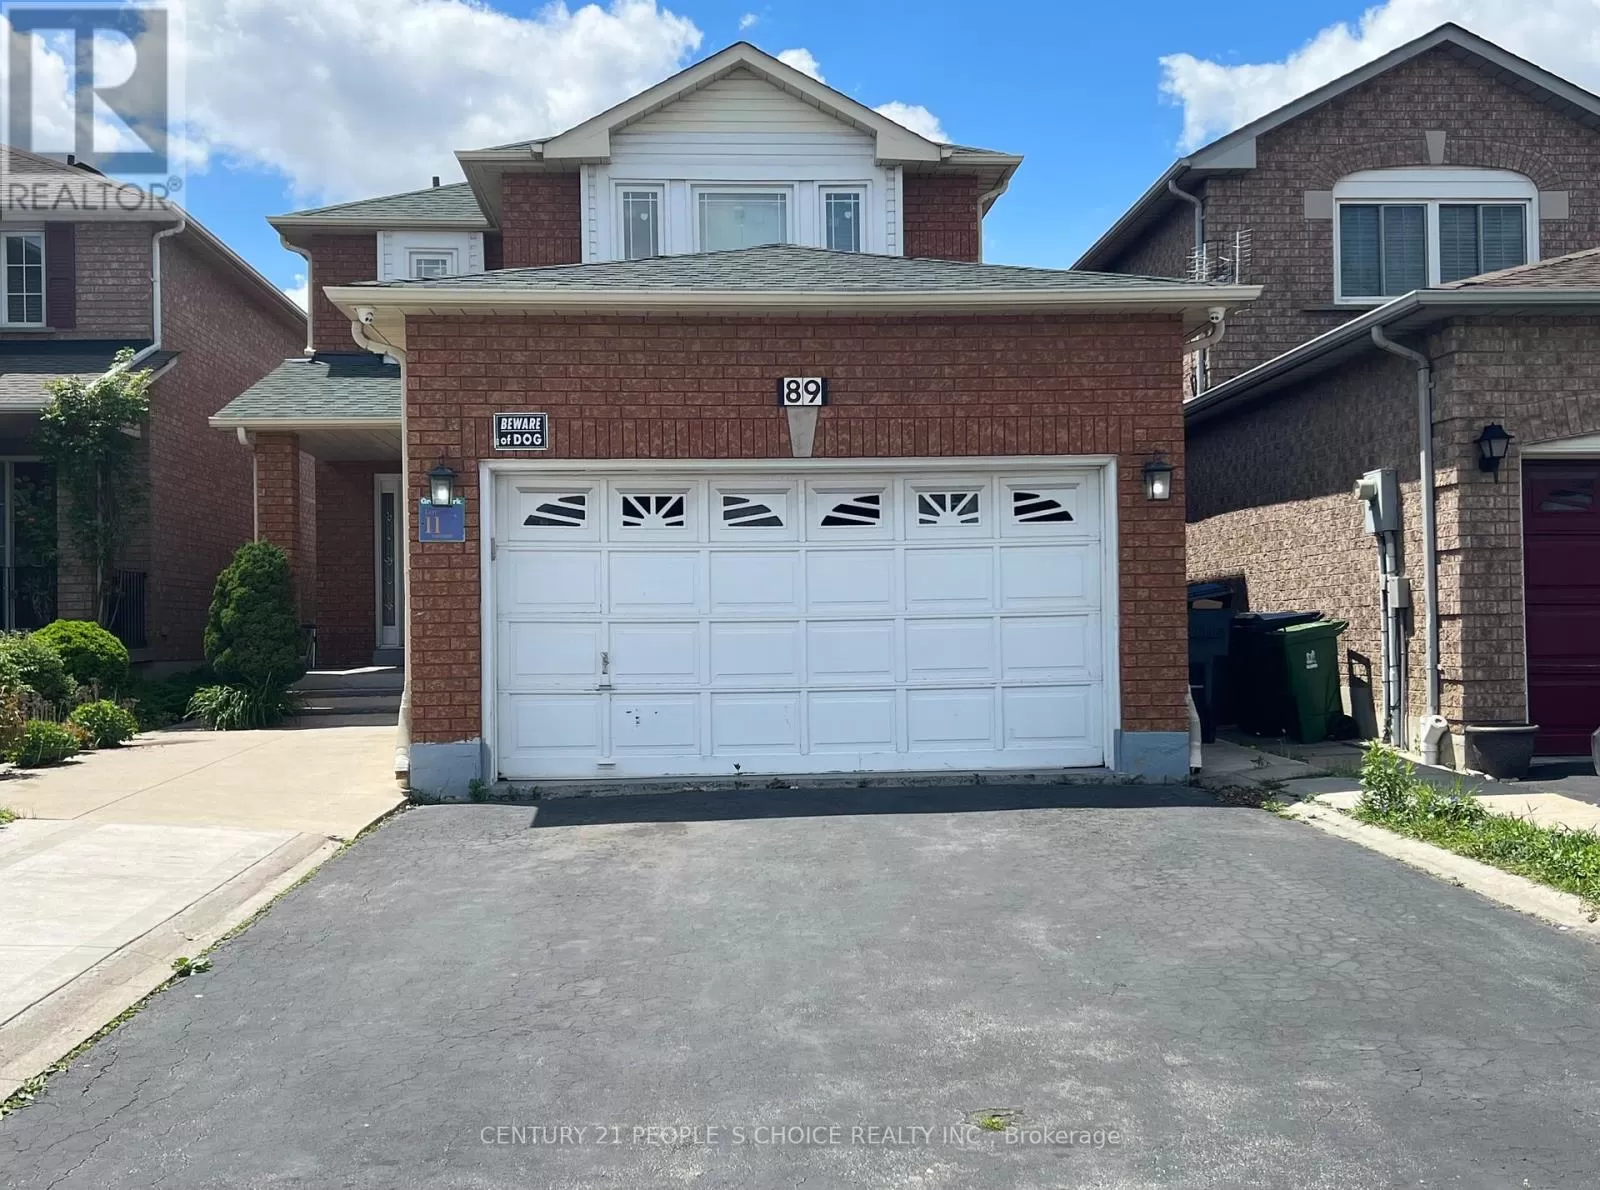 House for rent: 89 Upper Humber Drive, Toronto, Ontario M9W 7B6